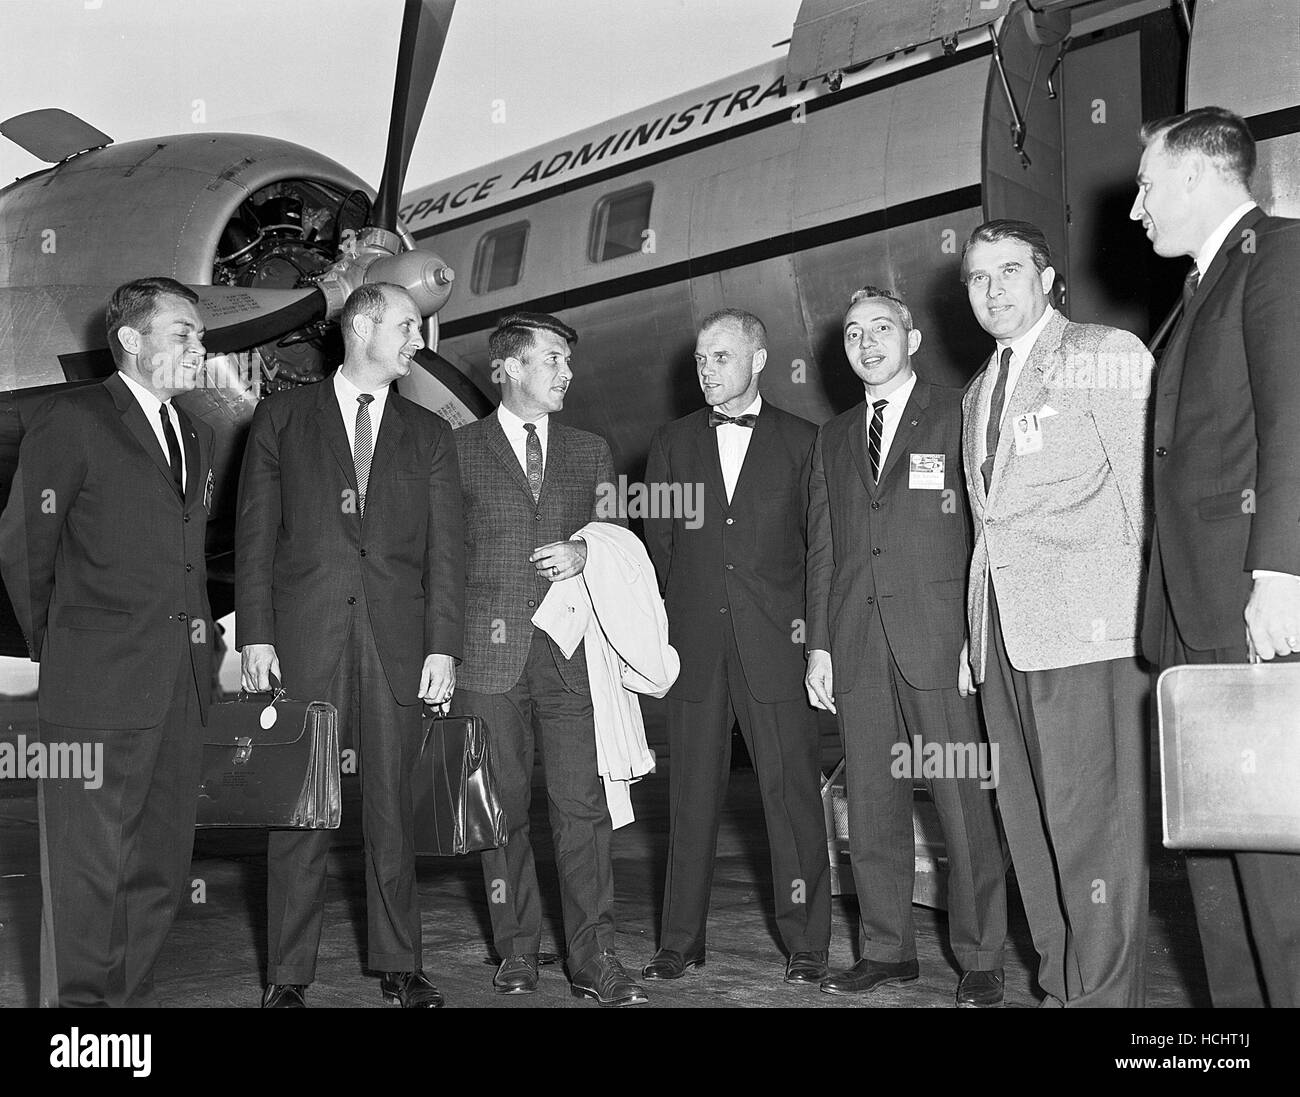 Officials from NASA Headquarters and the astronauts often met with Dr. Wernher von Braun in Huntsville, Alabama. This photograph was taken in September 1962 during one such visit. From left to right are Elliot See, Tom Stafford, Wally Schirra, John Glenn, Brainerd Holmes, Dr. von Braun, and Jim Lovell.Credit: NASA via CNP - NO WIRE SERVICE - Photo: Nasa/Consolidated News Photos/NASA via CNP Stock Photo